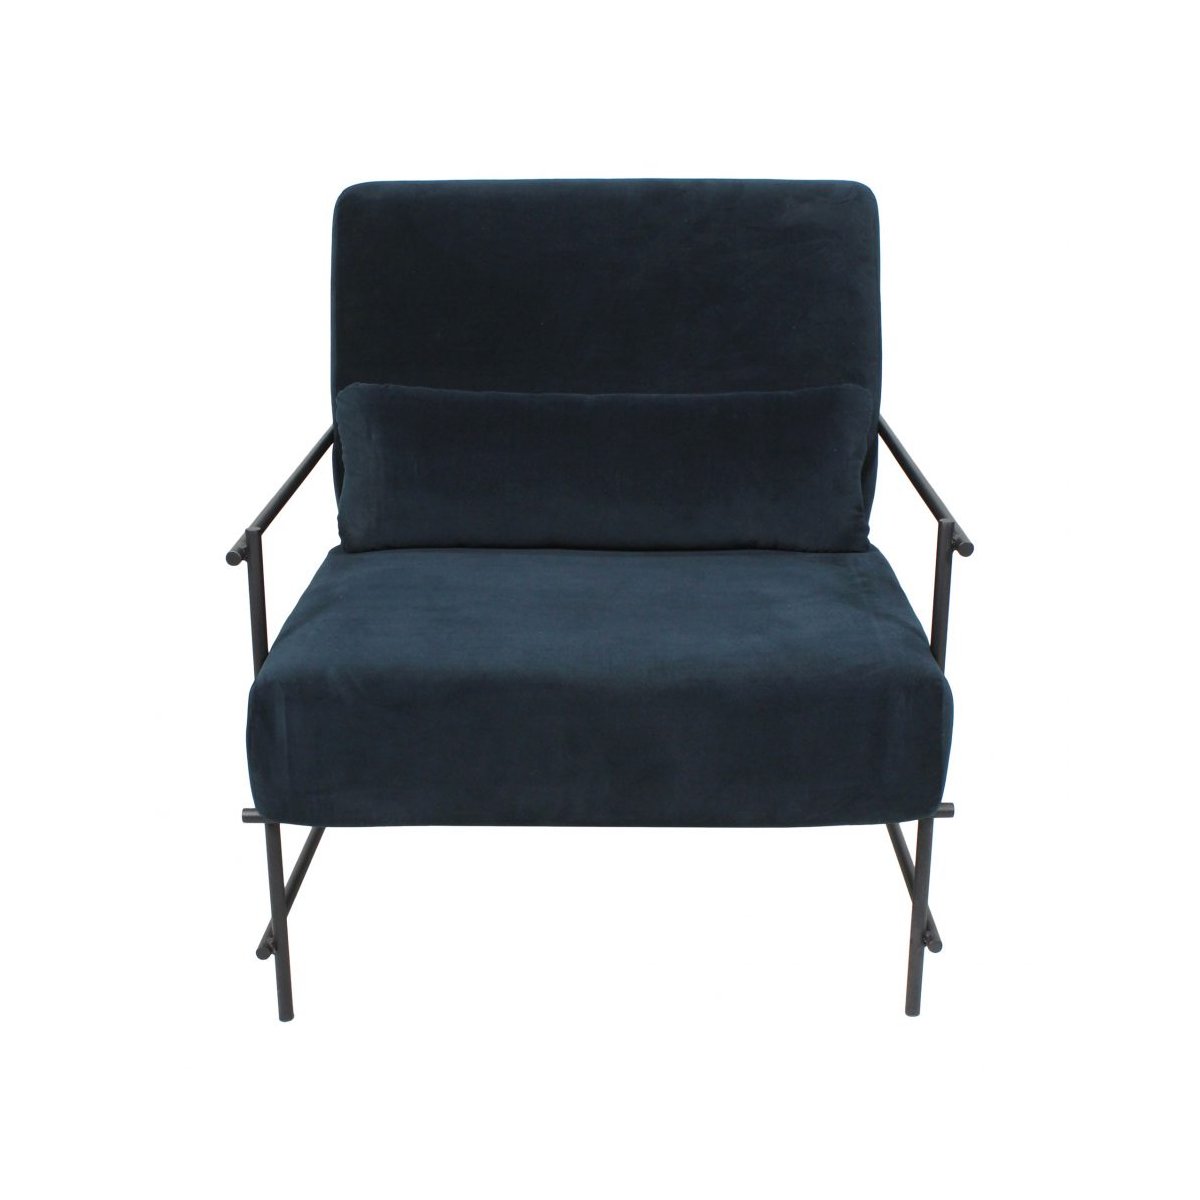 Load image into Gallery viewer, Collins Arm Chair Occasional Chairs Moe&amp;#39;s     Four Hands, Burke Decor, Mid Century Modern Furniture, Old Bones Furniture Company, Old Bones Co, Modern Mid Century, Designer Furniture, https://www.oldbonesco.com/
